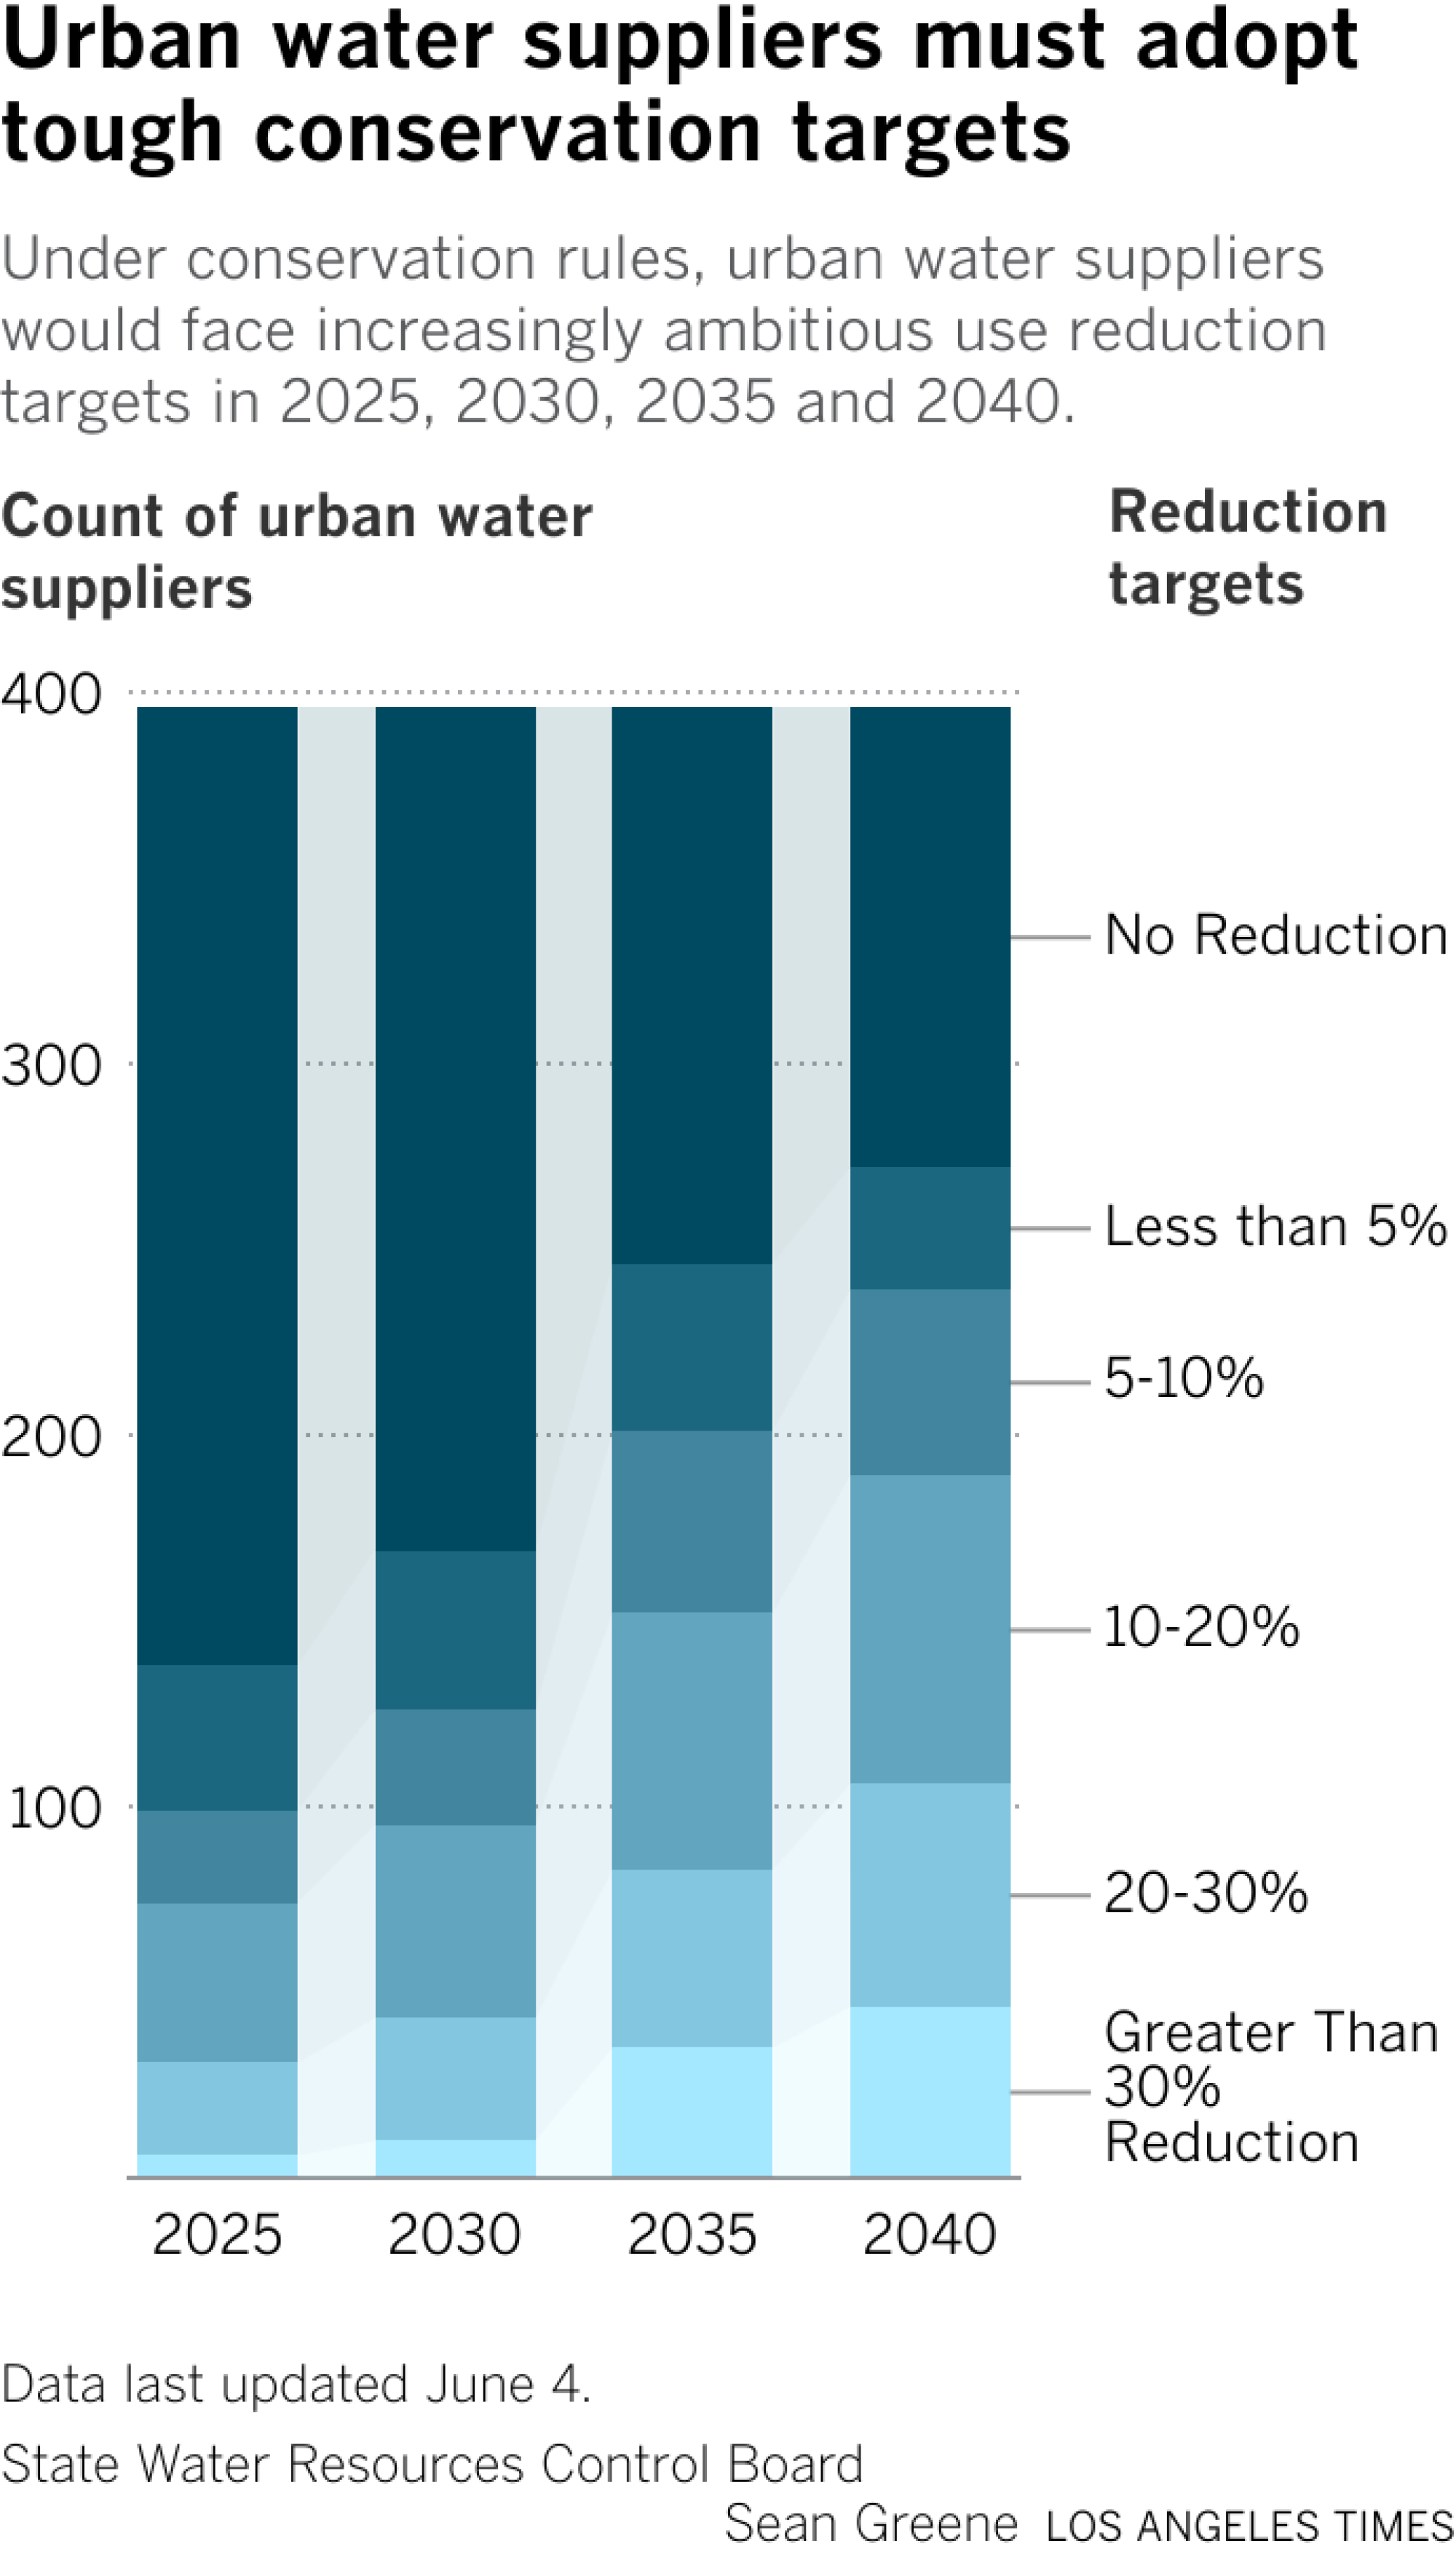 In 2025, the majority of urban water suppliers will not have to reduce their water use while 6 will have to make cuts greater than 30%. By 2040, about 60% of suppliers will need to reduce water use by 5% or more.